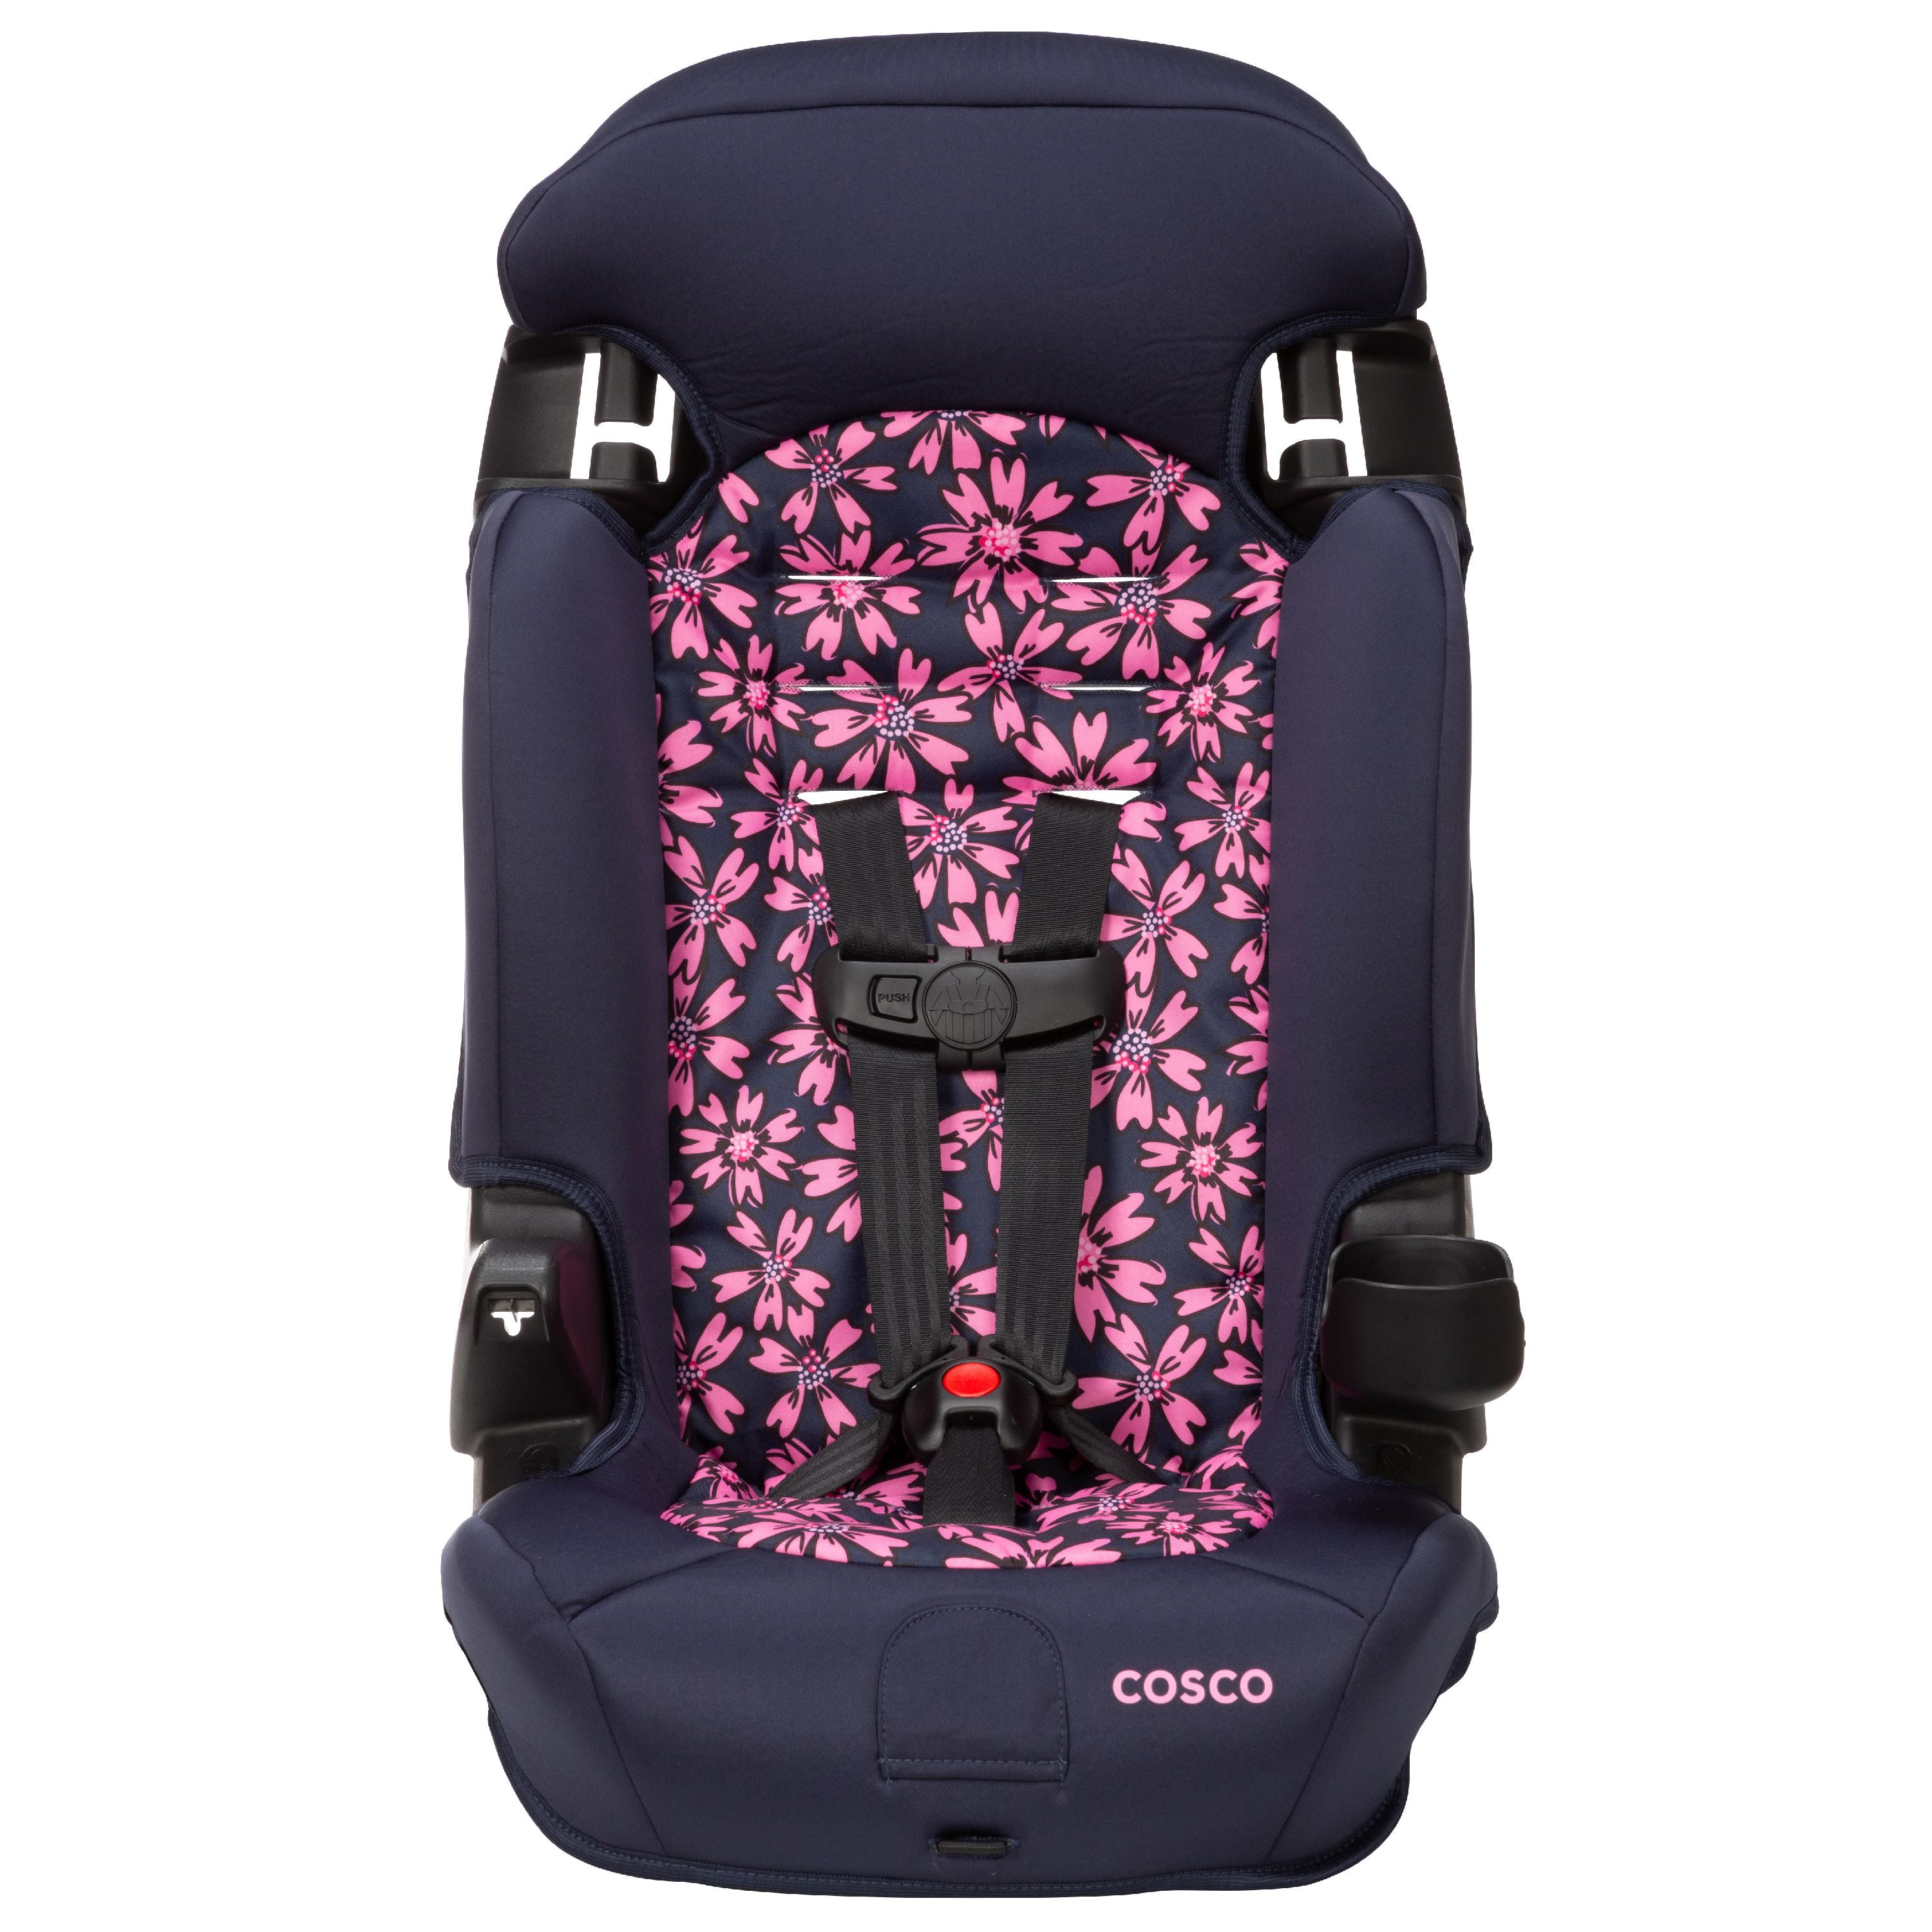 Cosco Finale 2 in 1 Booster Car Seat Pink Amaryllis Walmart 